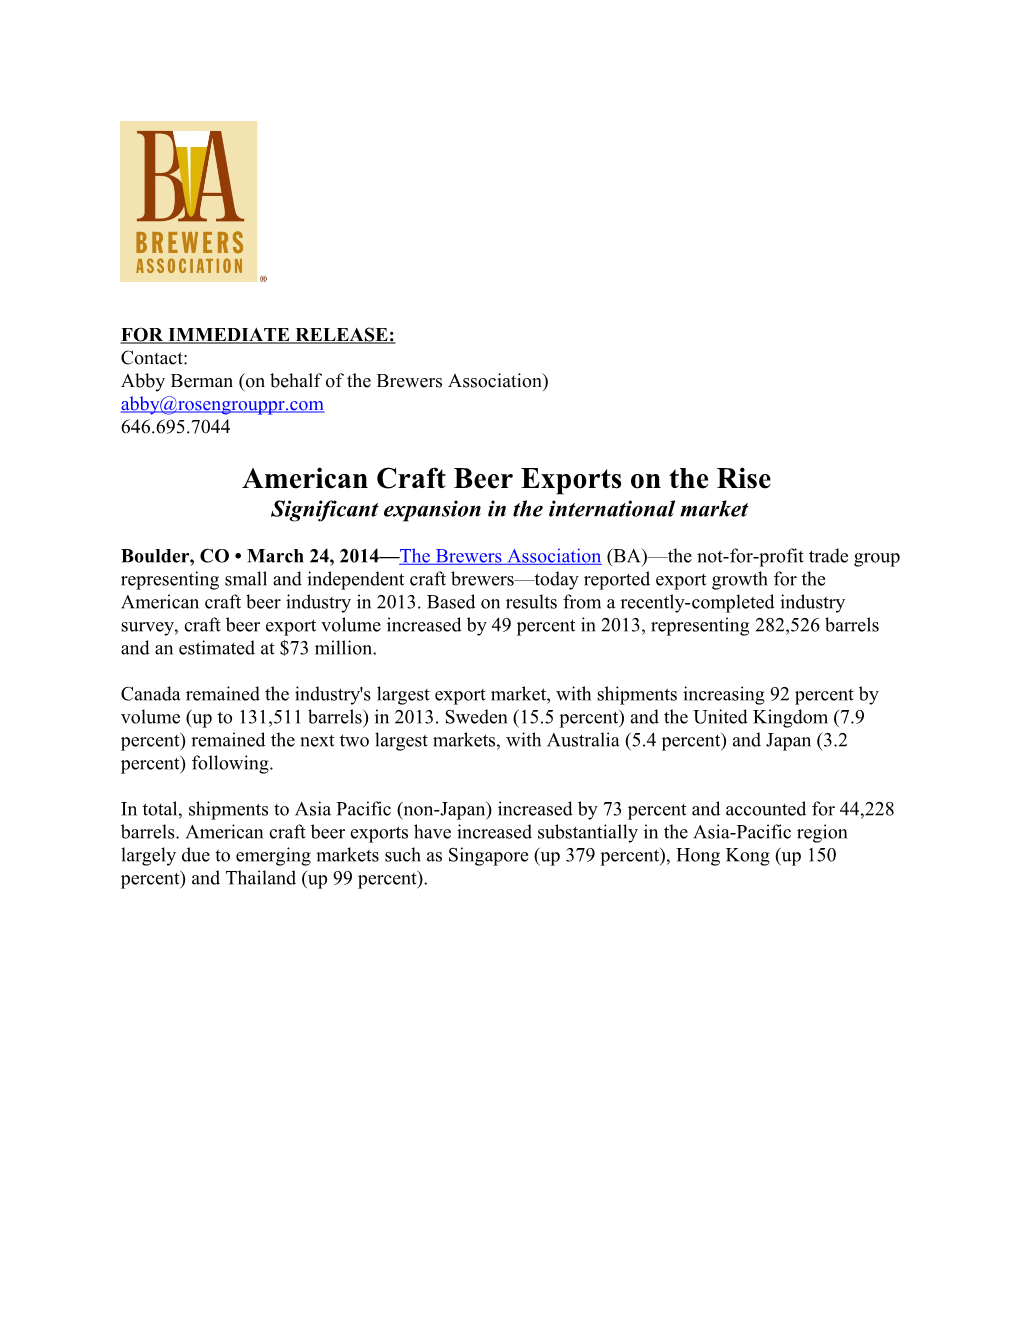 American Craft Beer Exports on the Rise